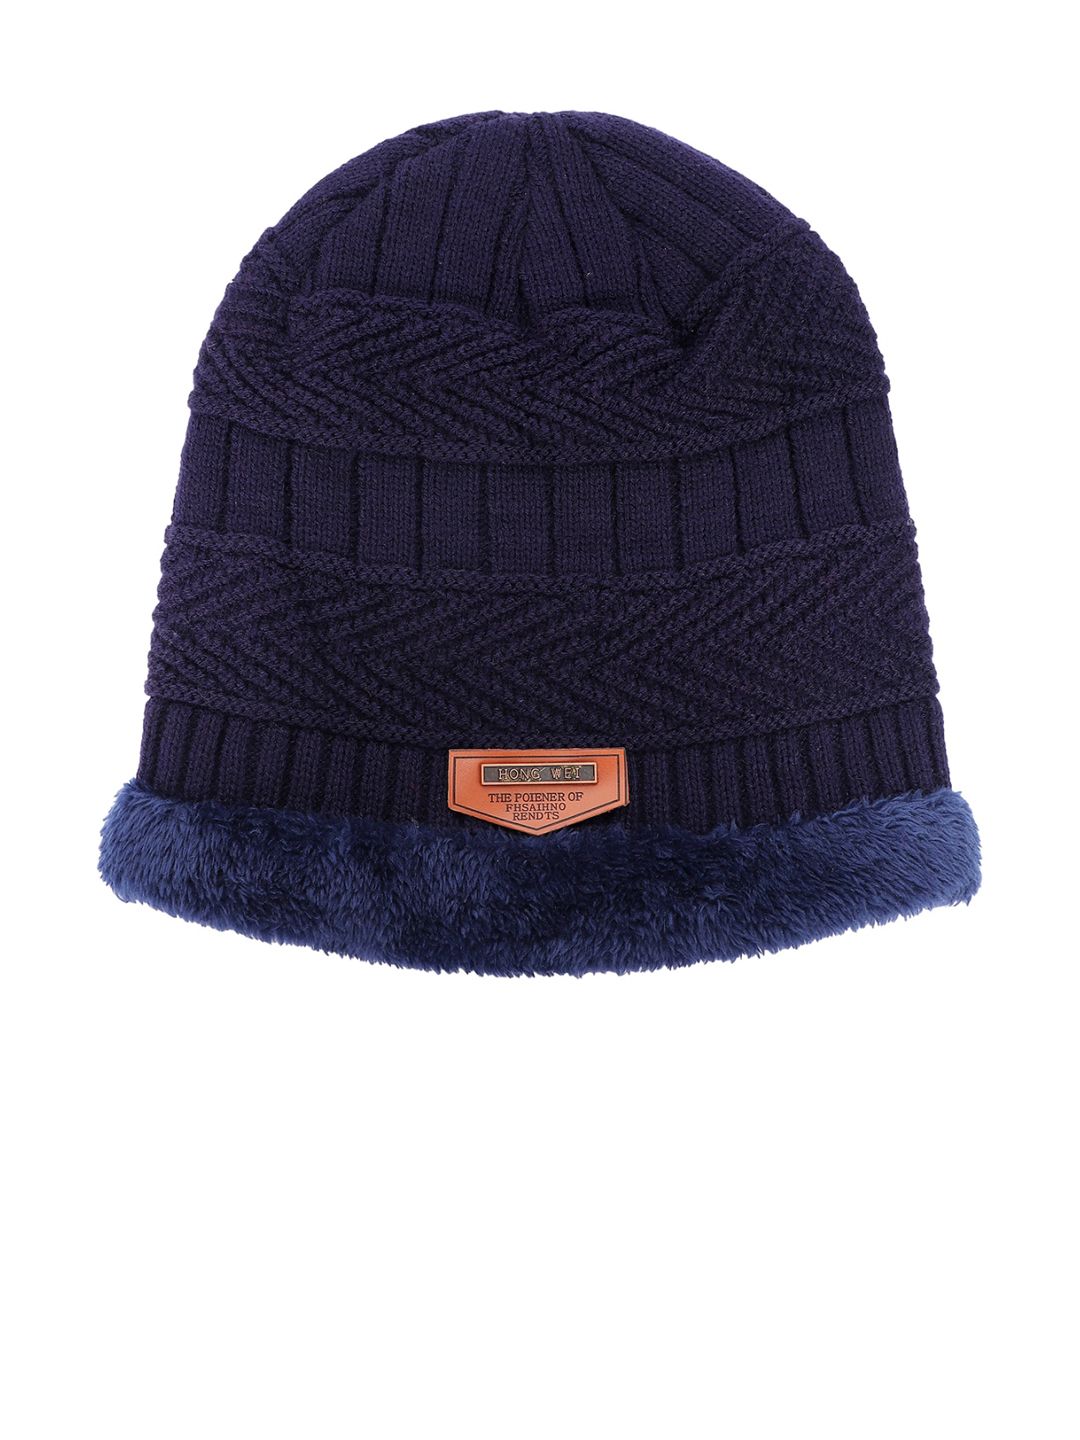 iSWEVEN Unisex Navy Blue Self-Design Beanie Price in India